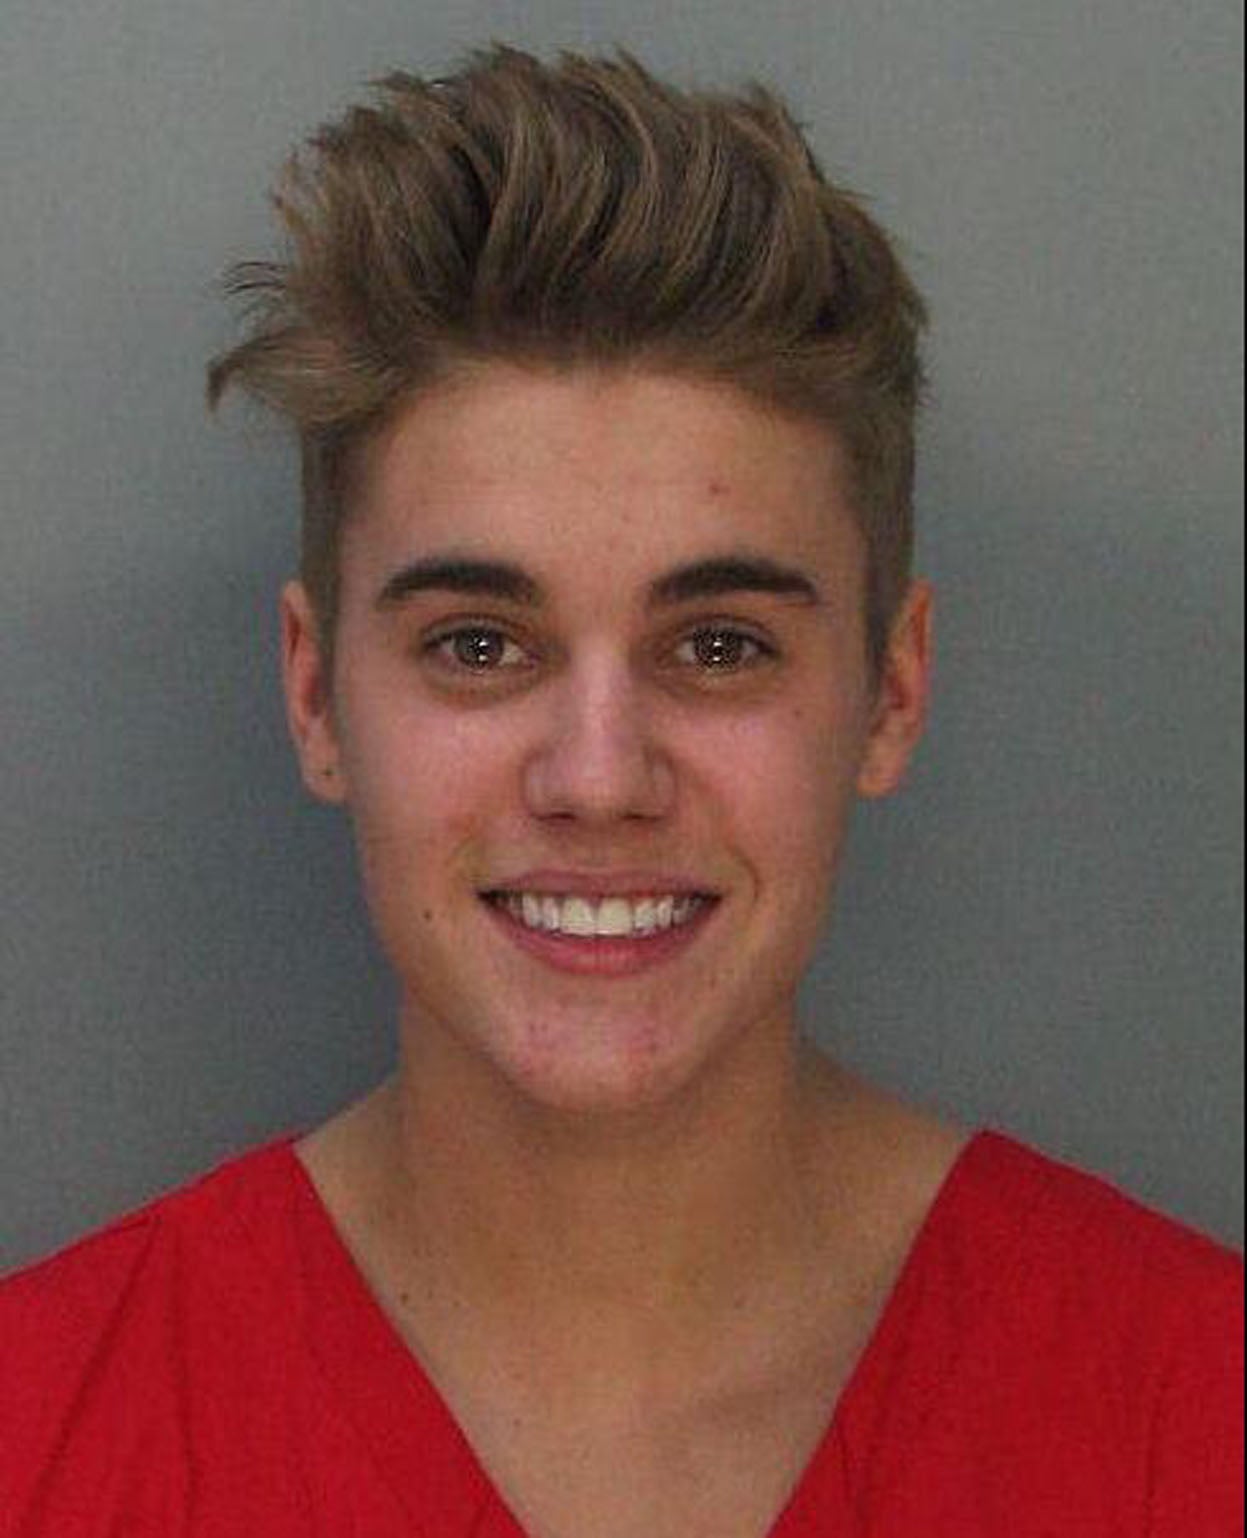 Dressed in orange, the singer appeared dishevelled, but in high spirits, as he smiled for police behind the camera